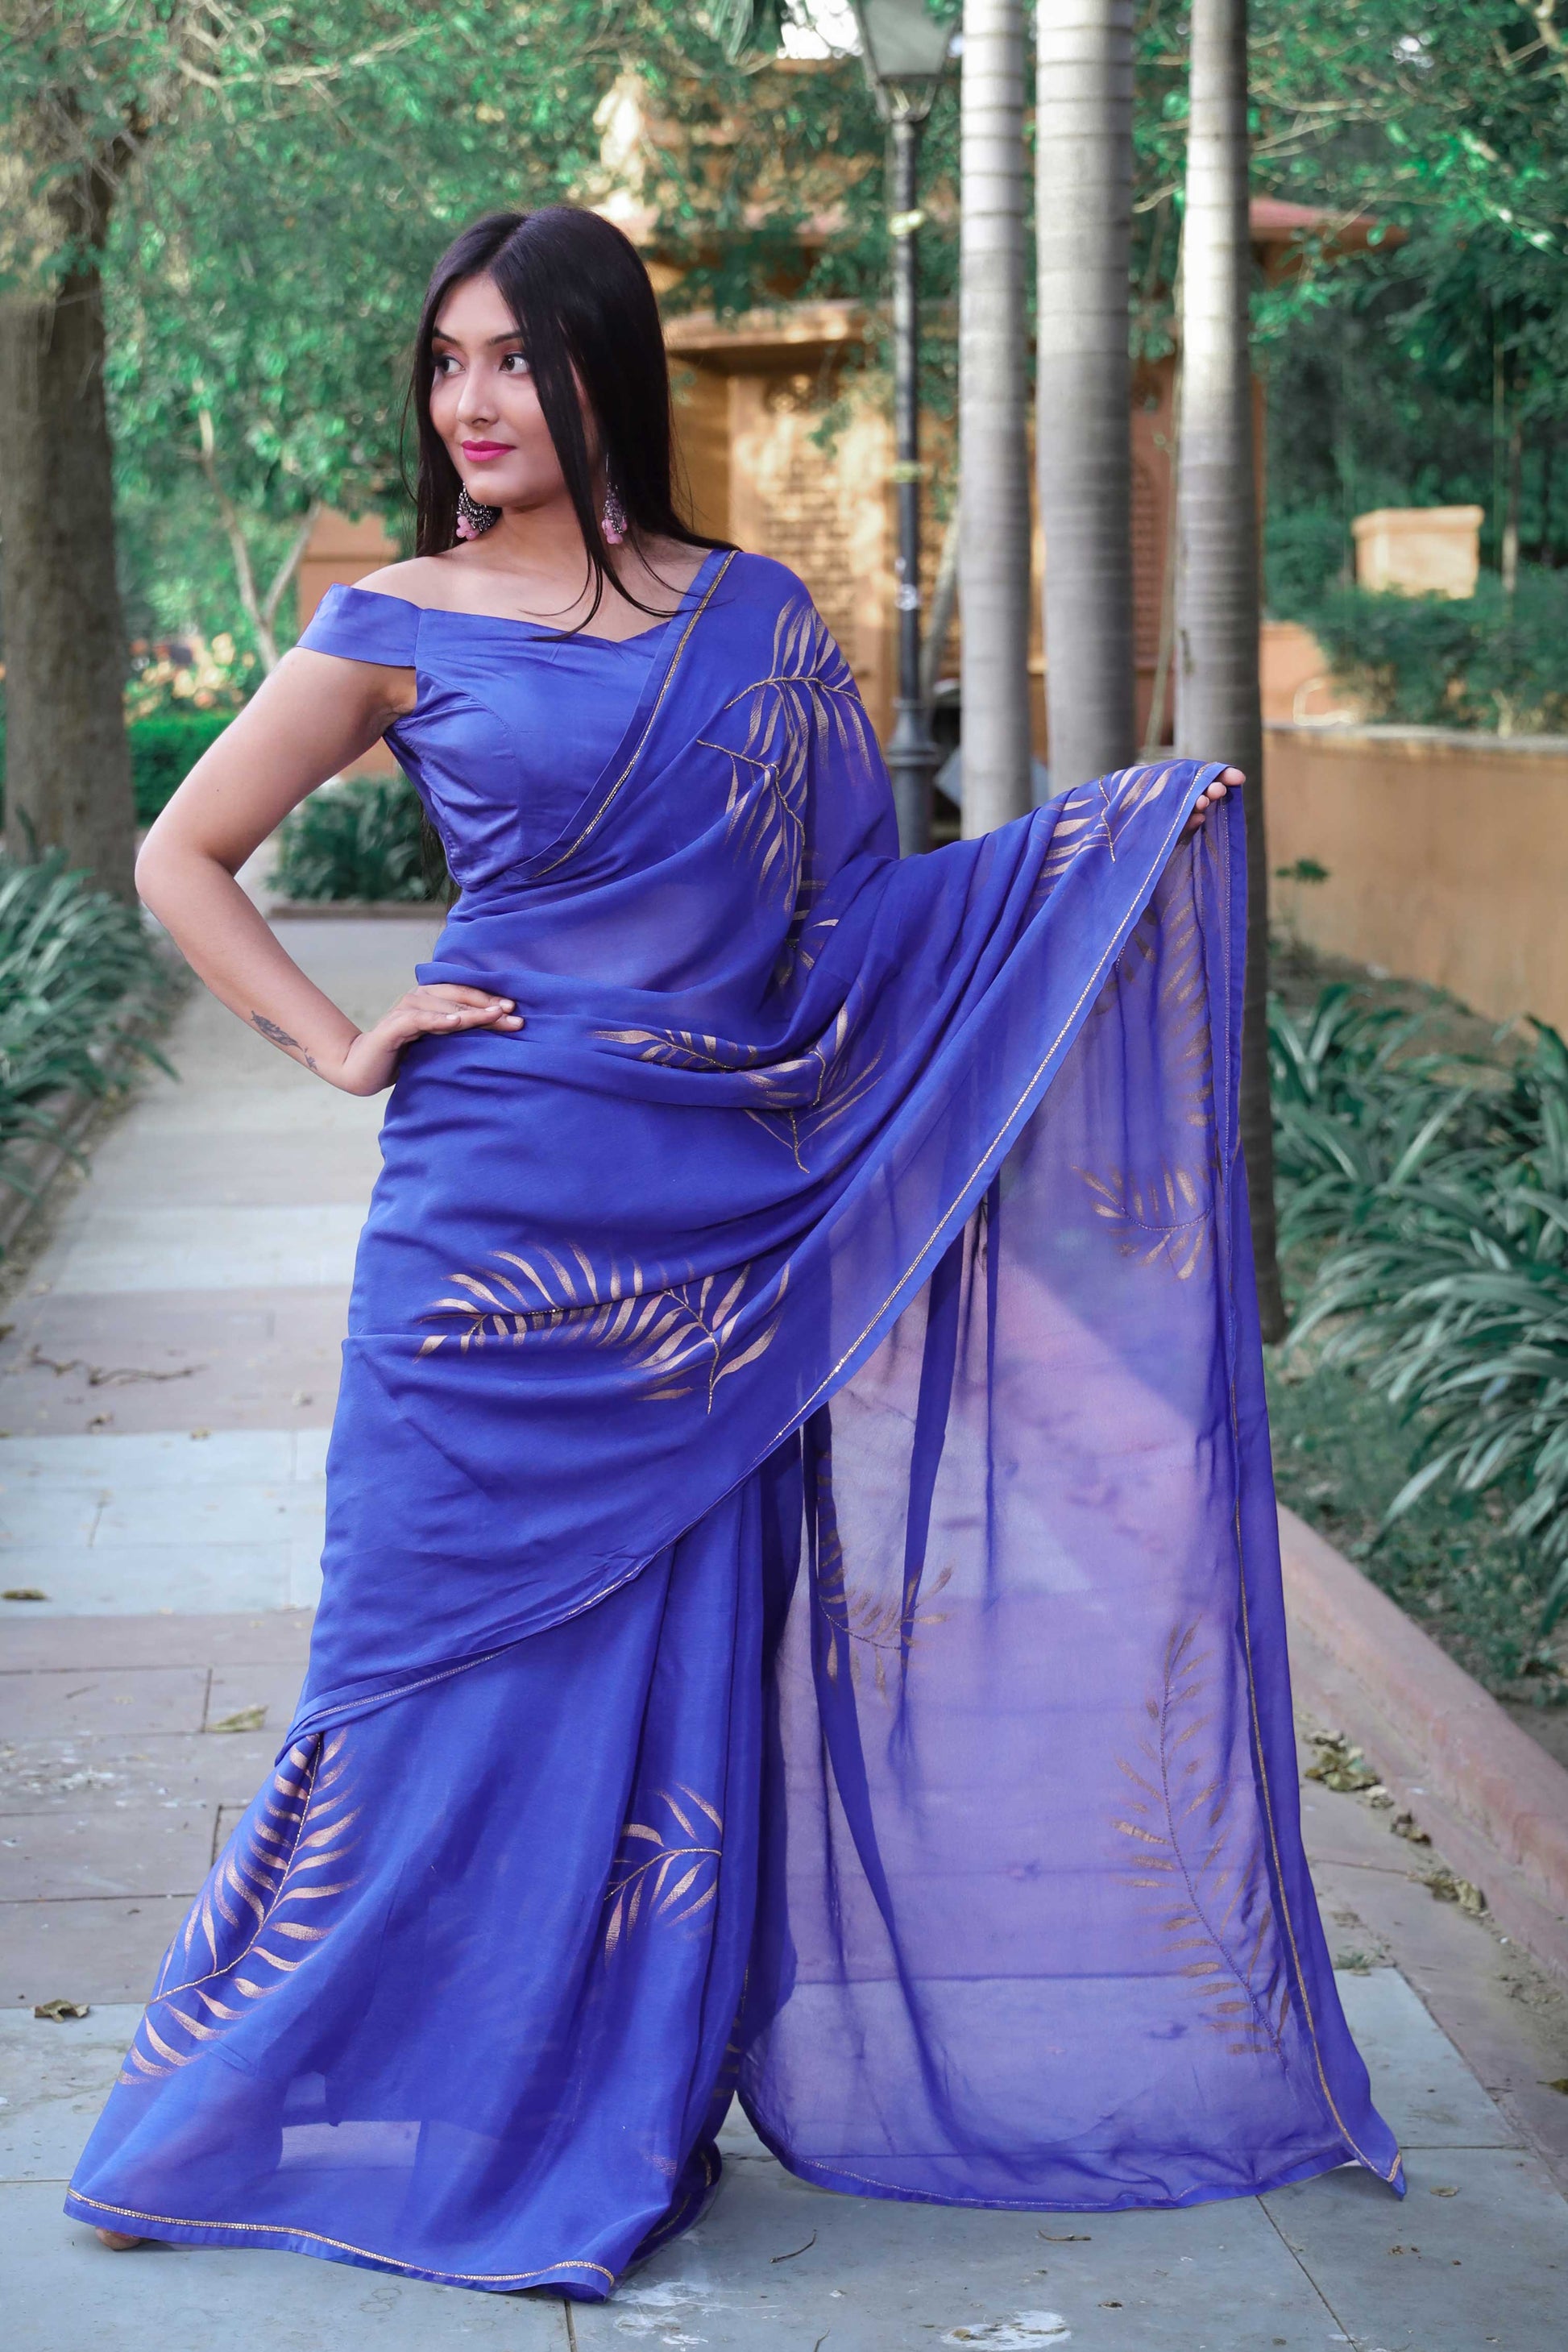 Elegant royal blue chinon chiffon silk saree with hand-painted golden palm leaves and cut beads embroidery. A stunning saree for a stylish, simple saree look. Perfect for weddings and special occasions